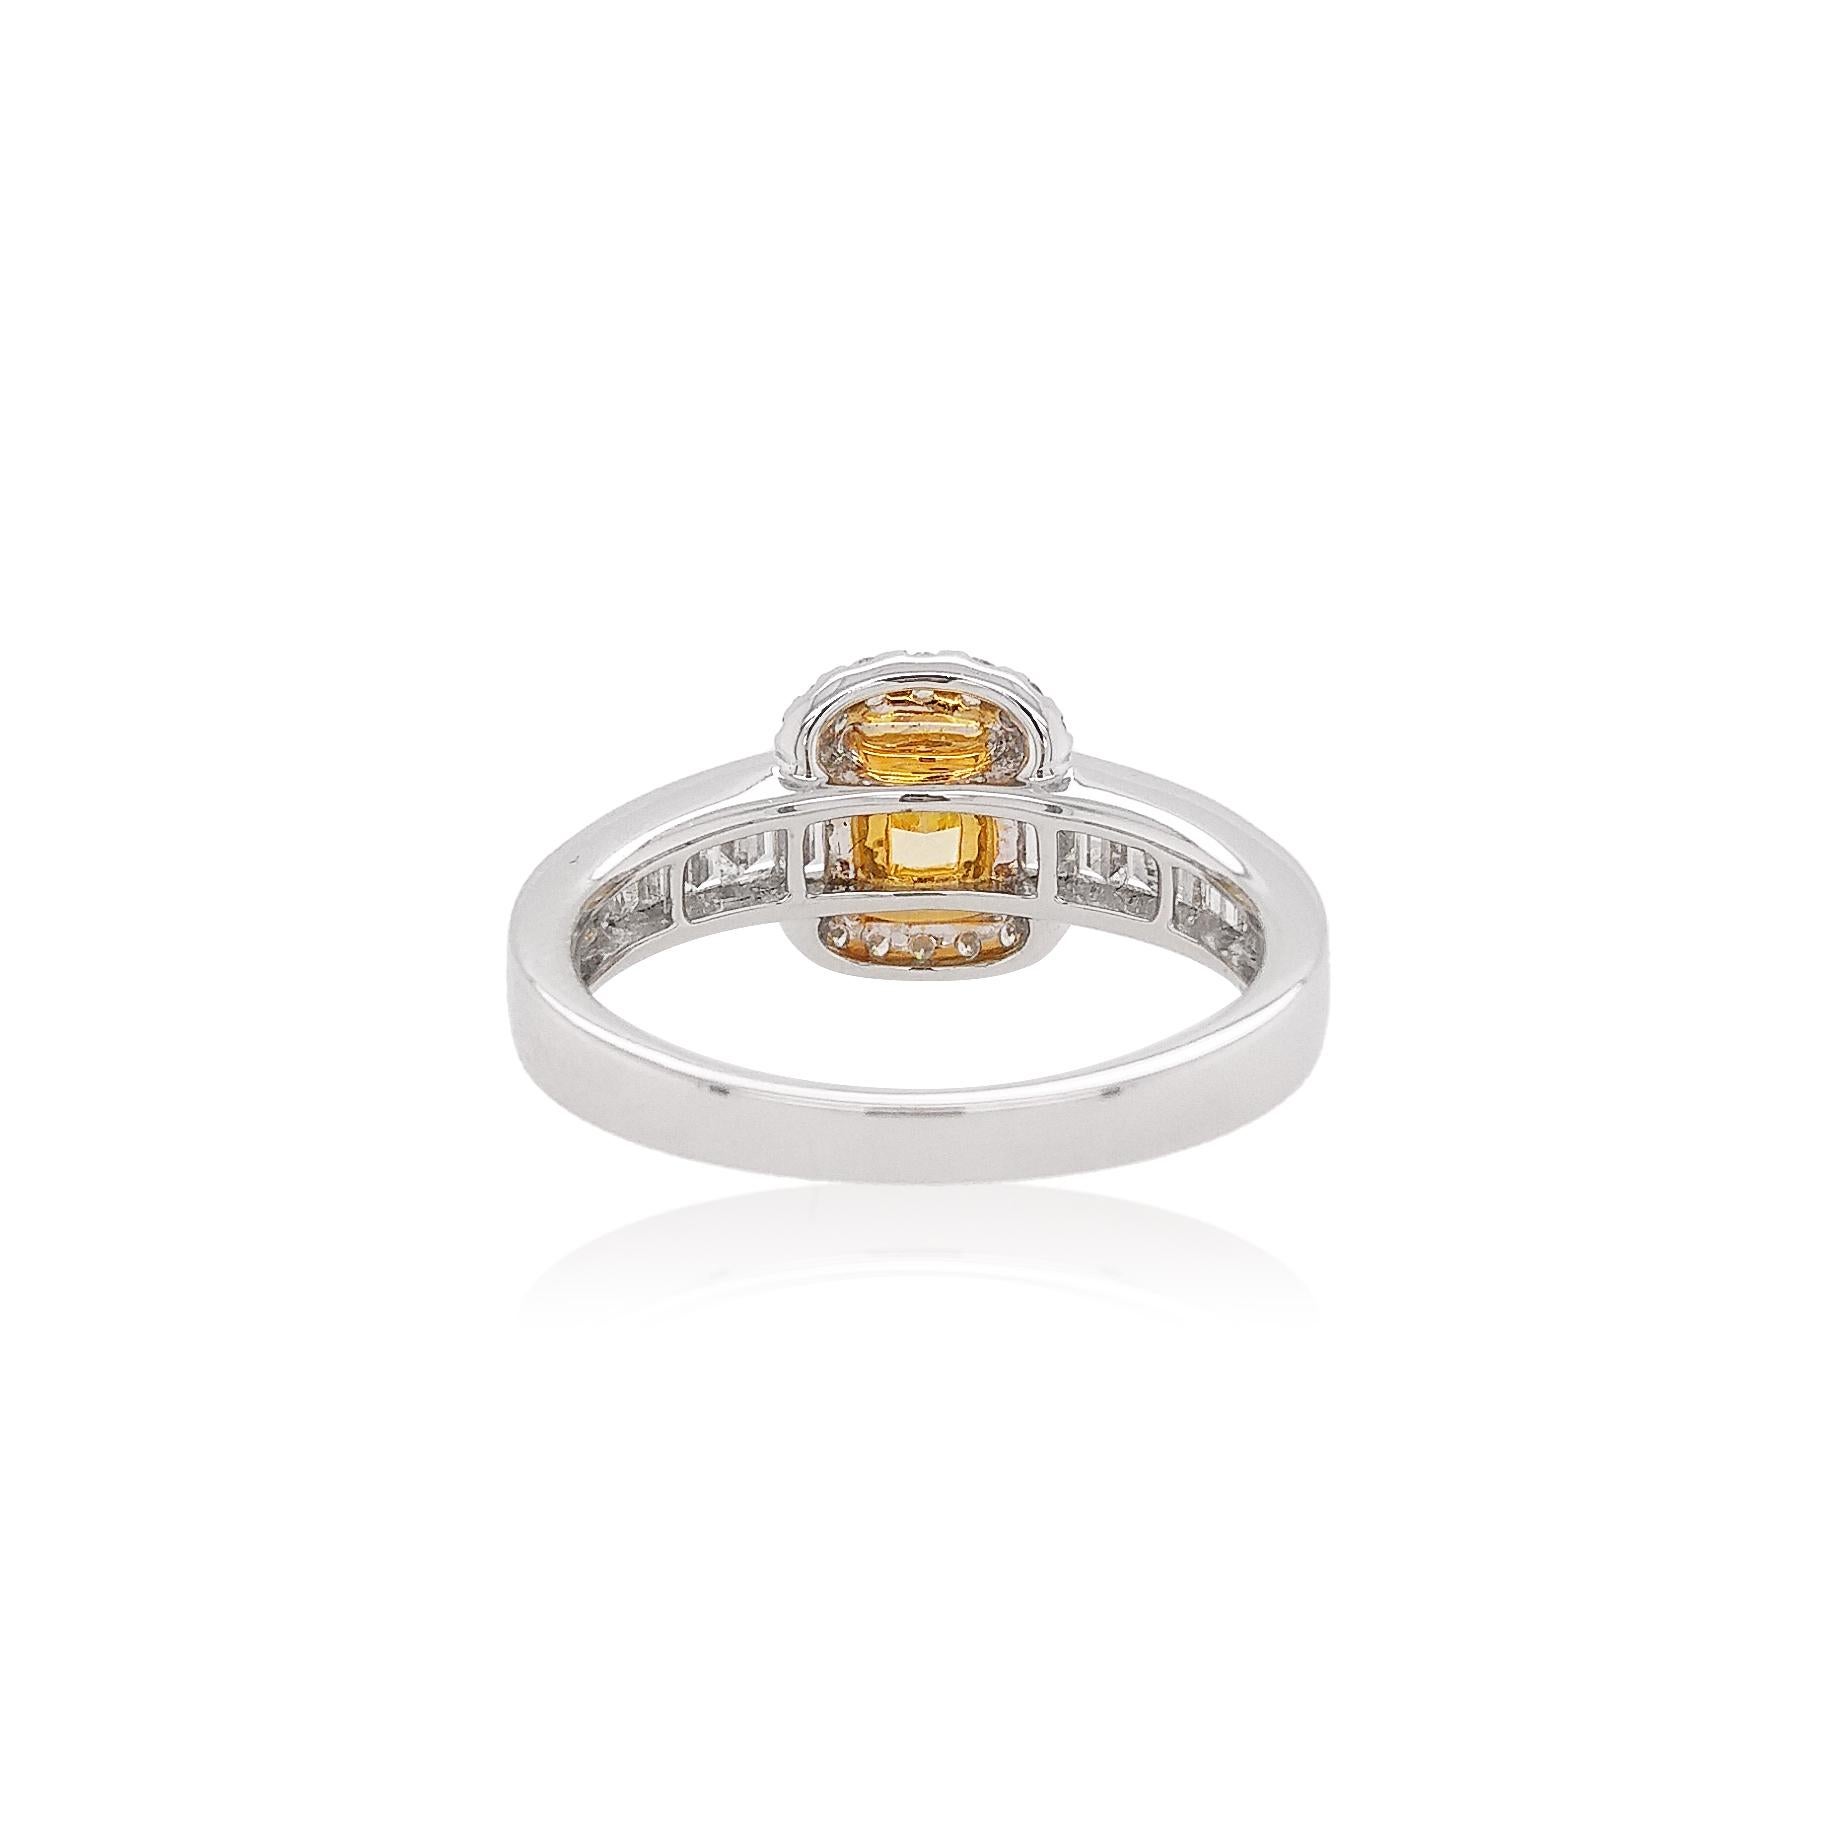 This delicate ring features a lustrous Fancy Intense Yellow Diamond at the forefront of its design. The spectacular hues of the Yellow Diamond are perfectly accentuated by the Platinum and 18 Karat Yellow Gold setting, and elegant Baguette White